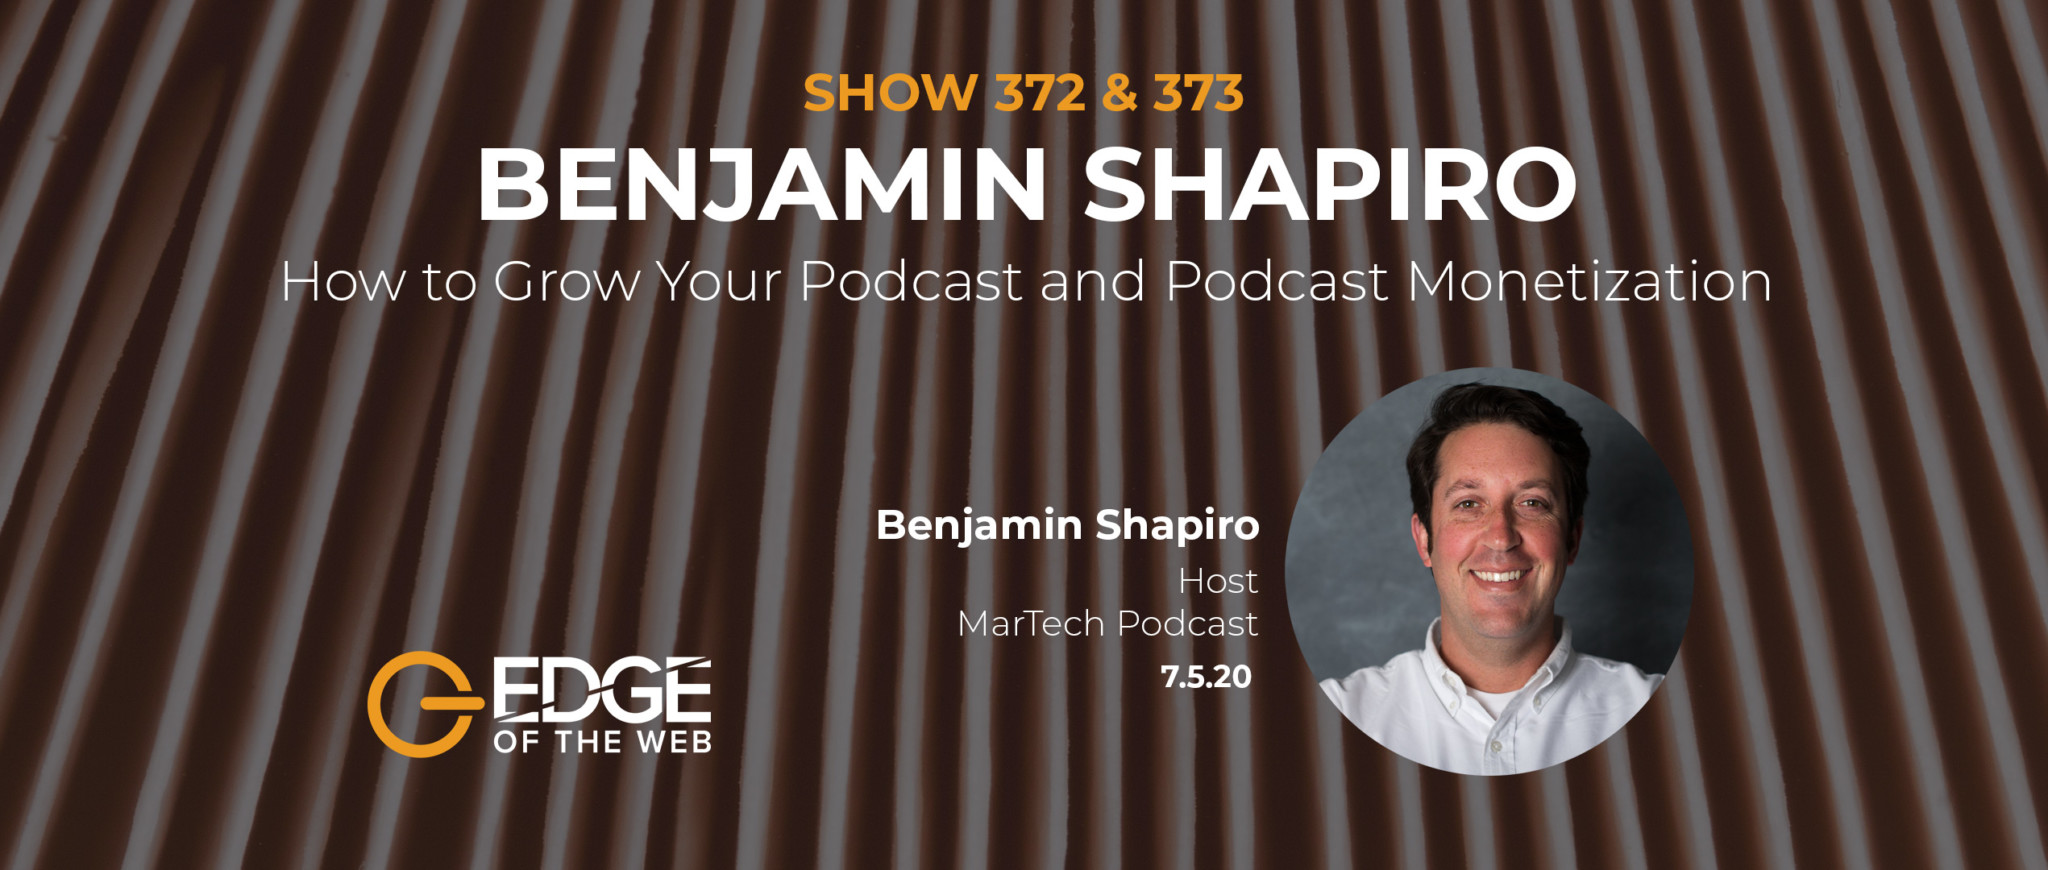 EP 372 & 373: How to Grow Your Podcast with Benjamin Shapiro